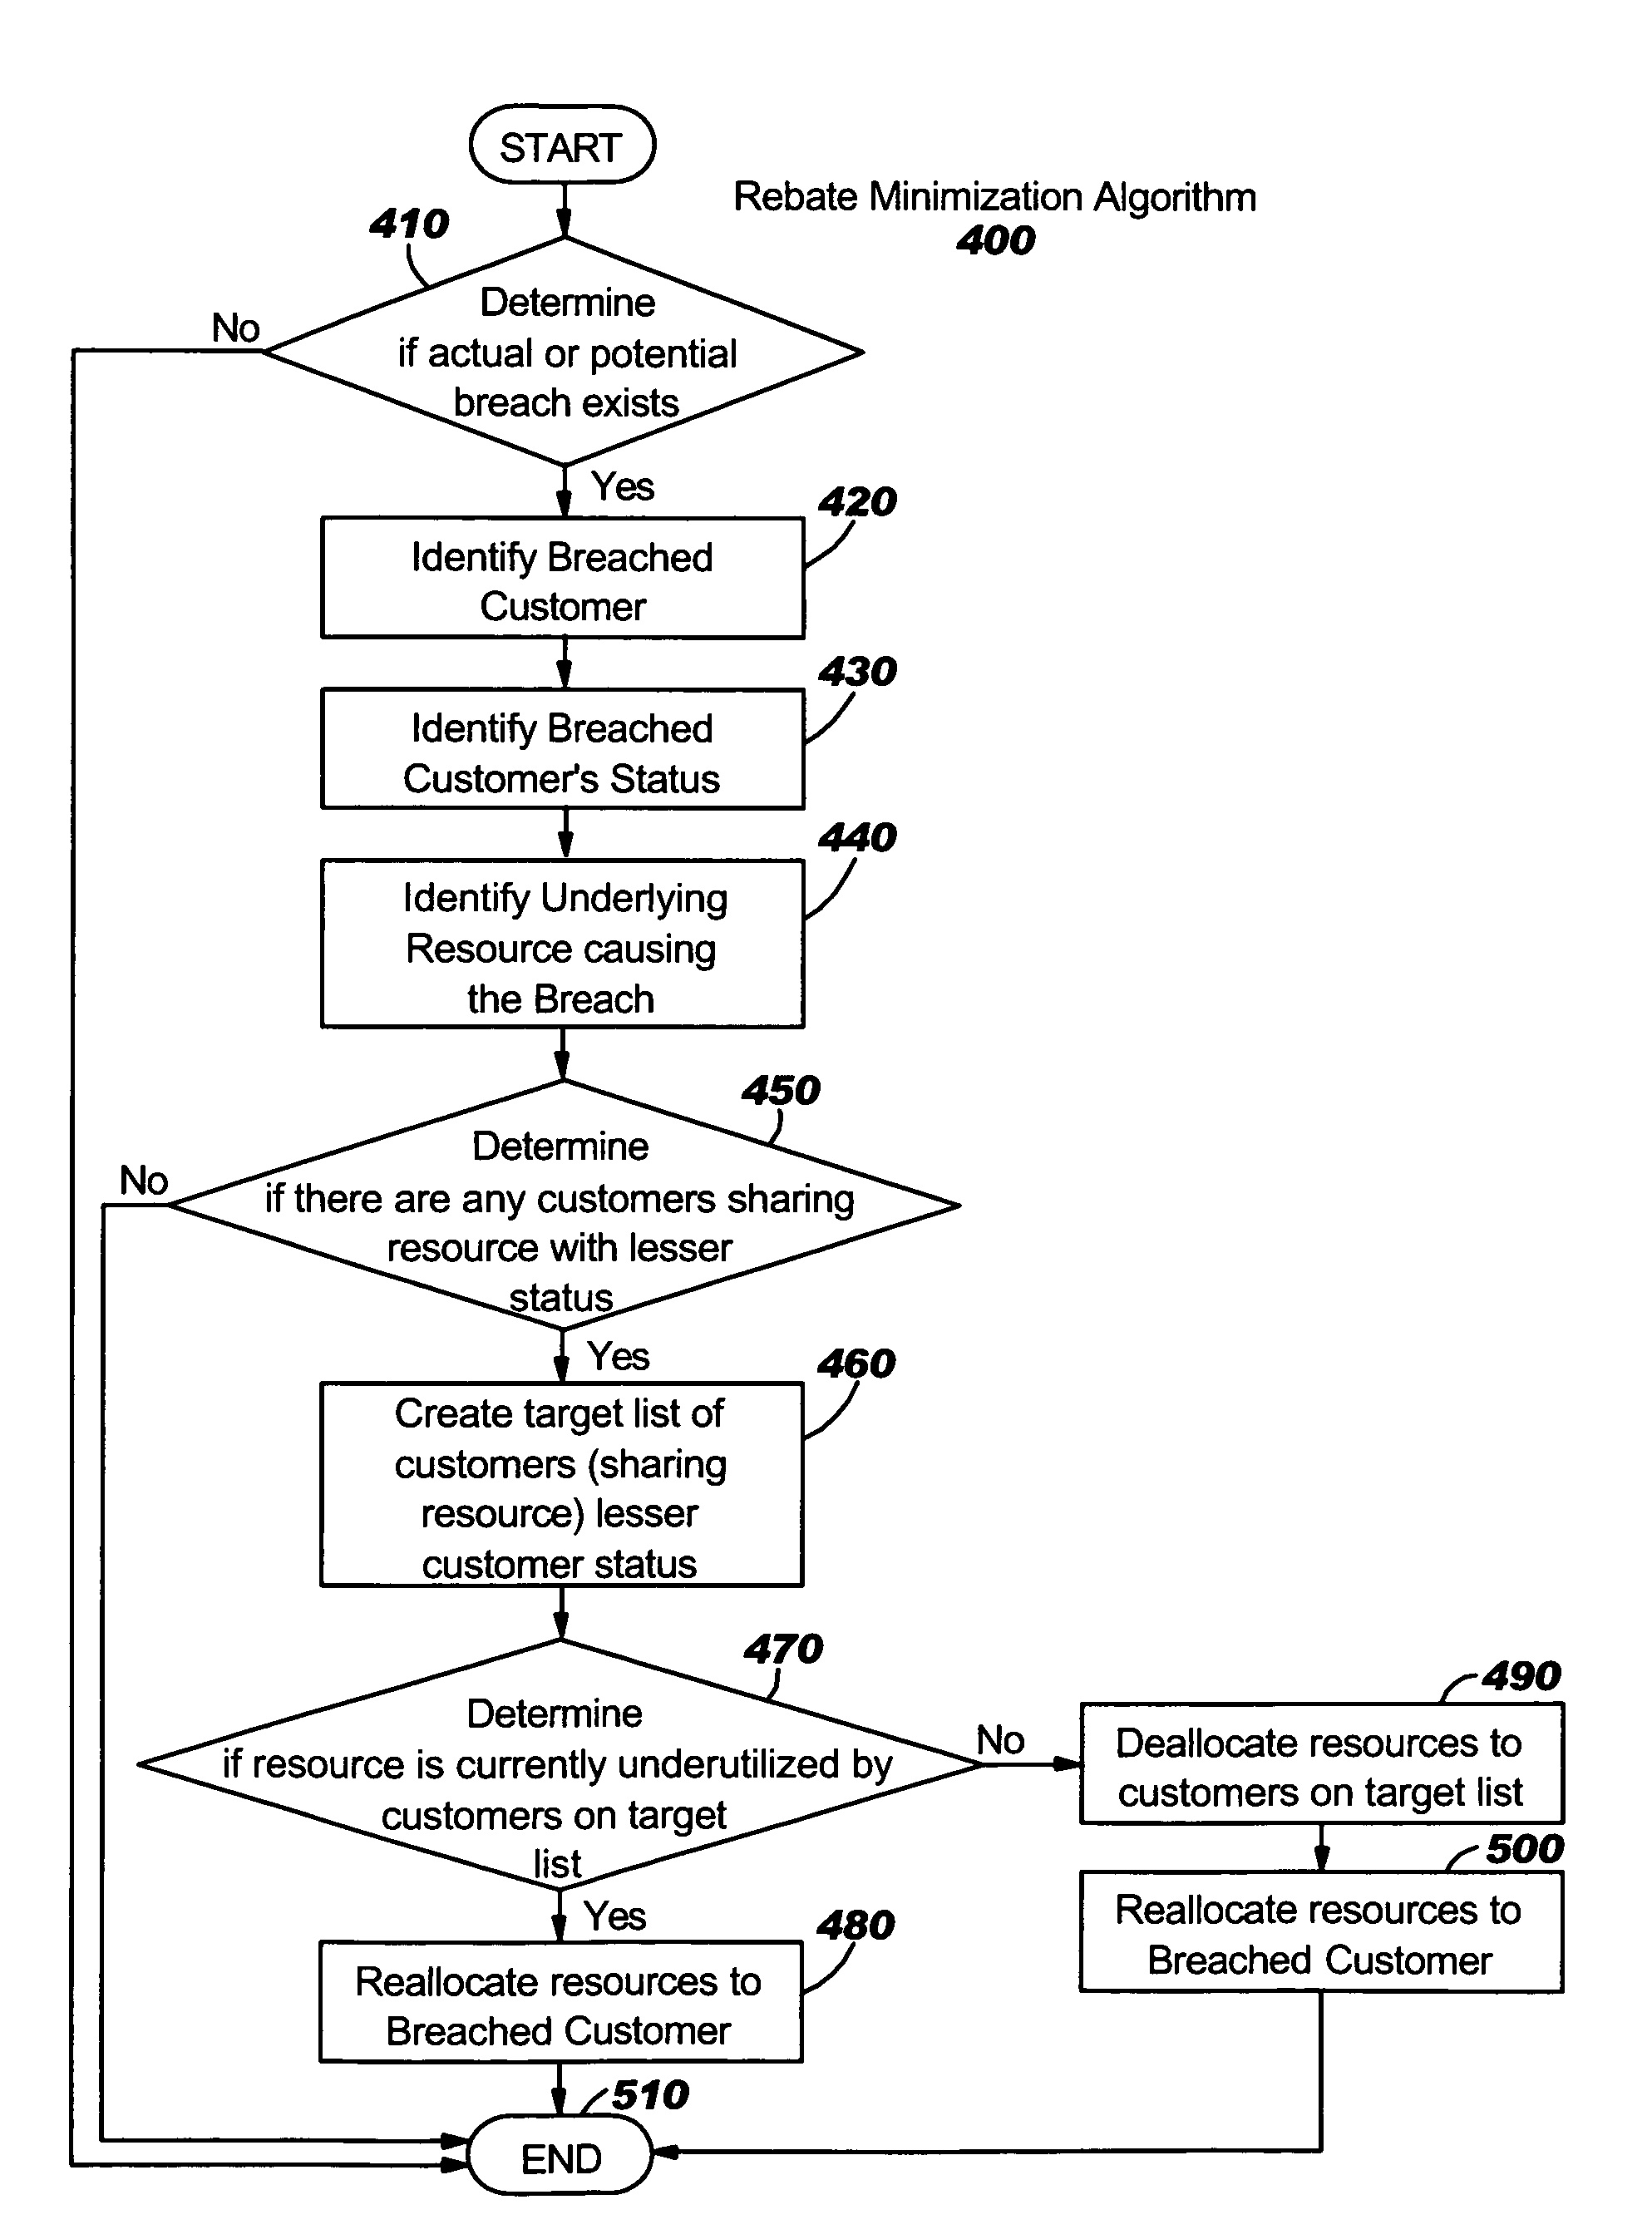 Algorithm for minimizing rebate value due to SLA breach in a utility computing environment